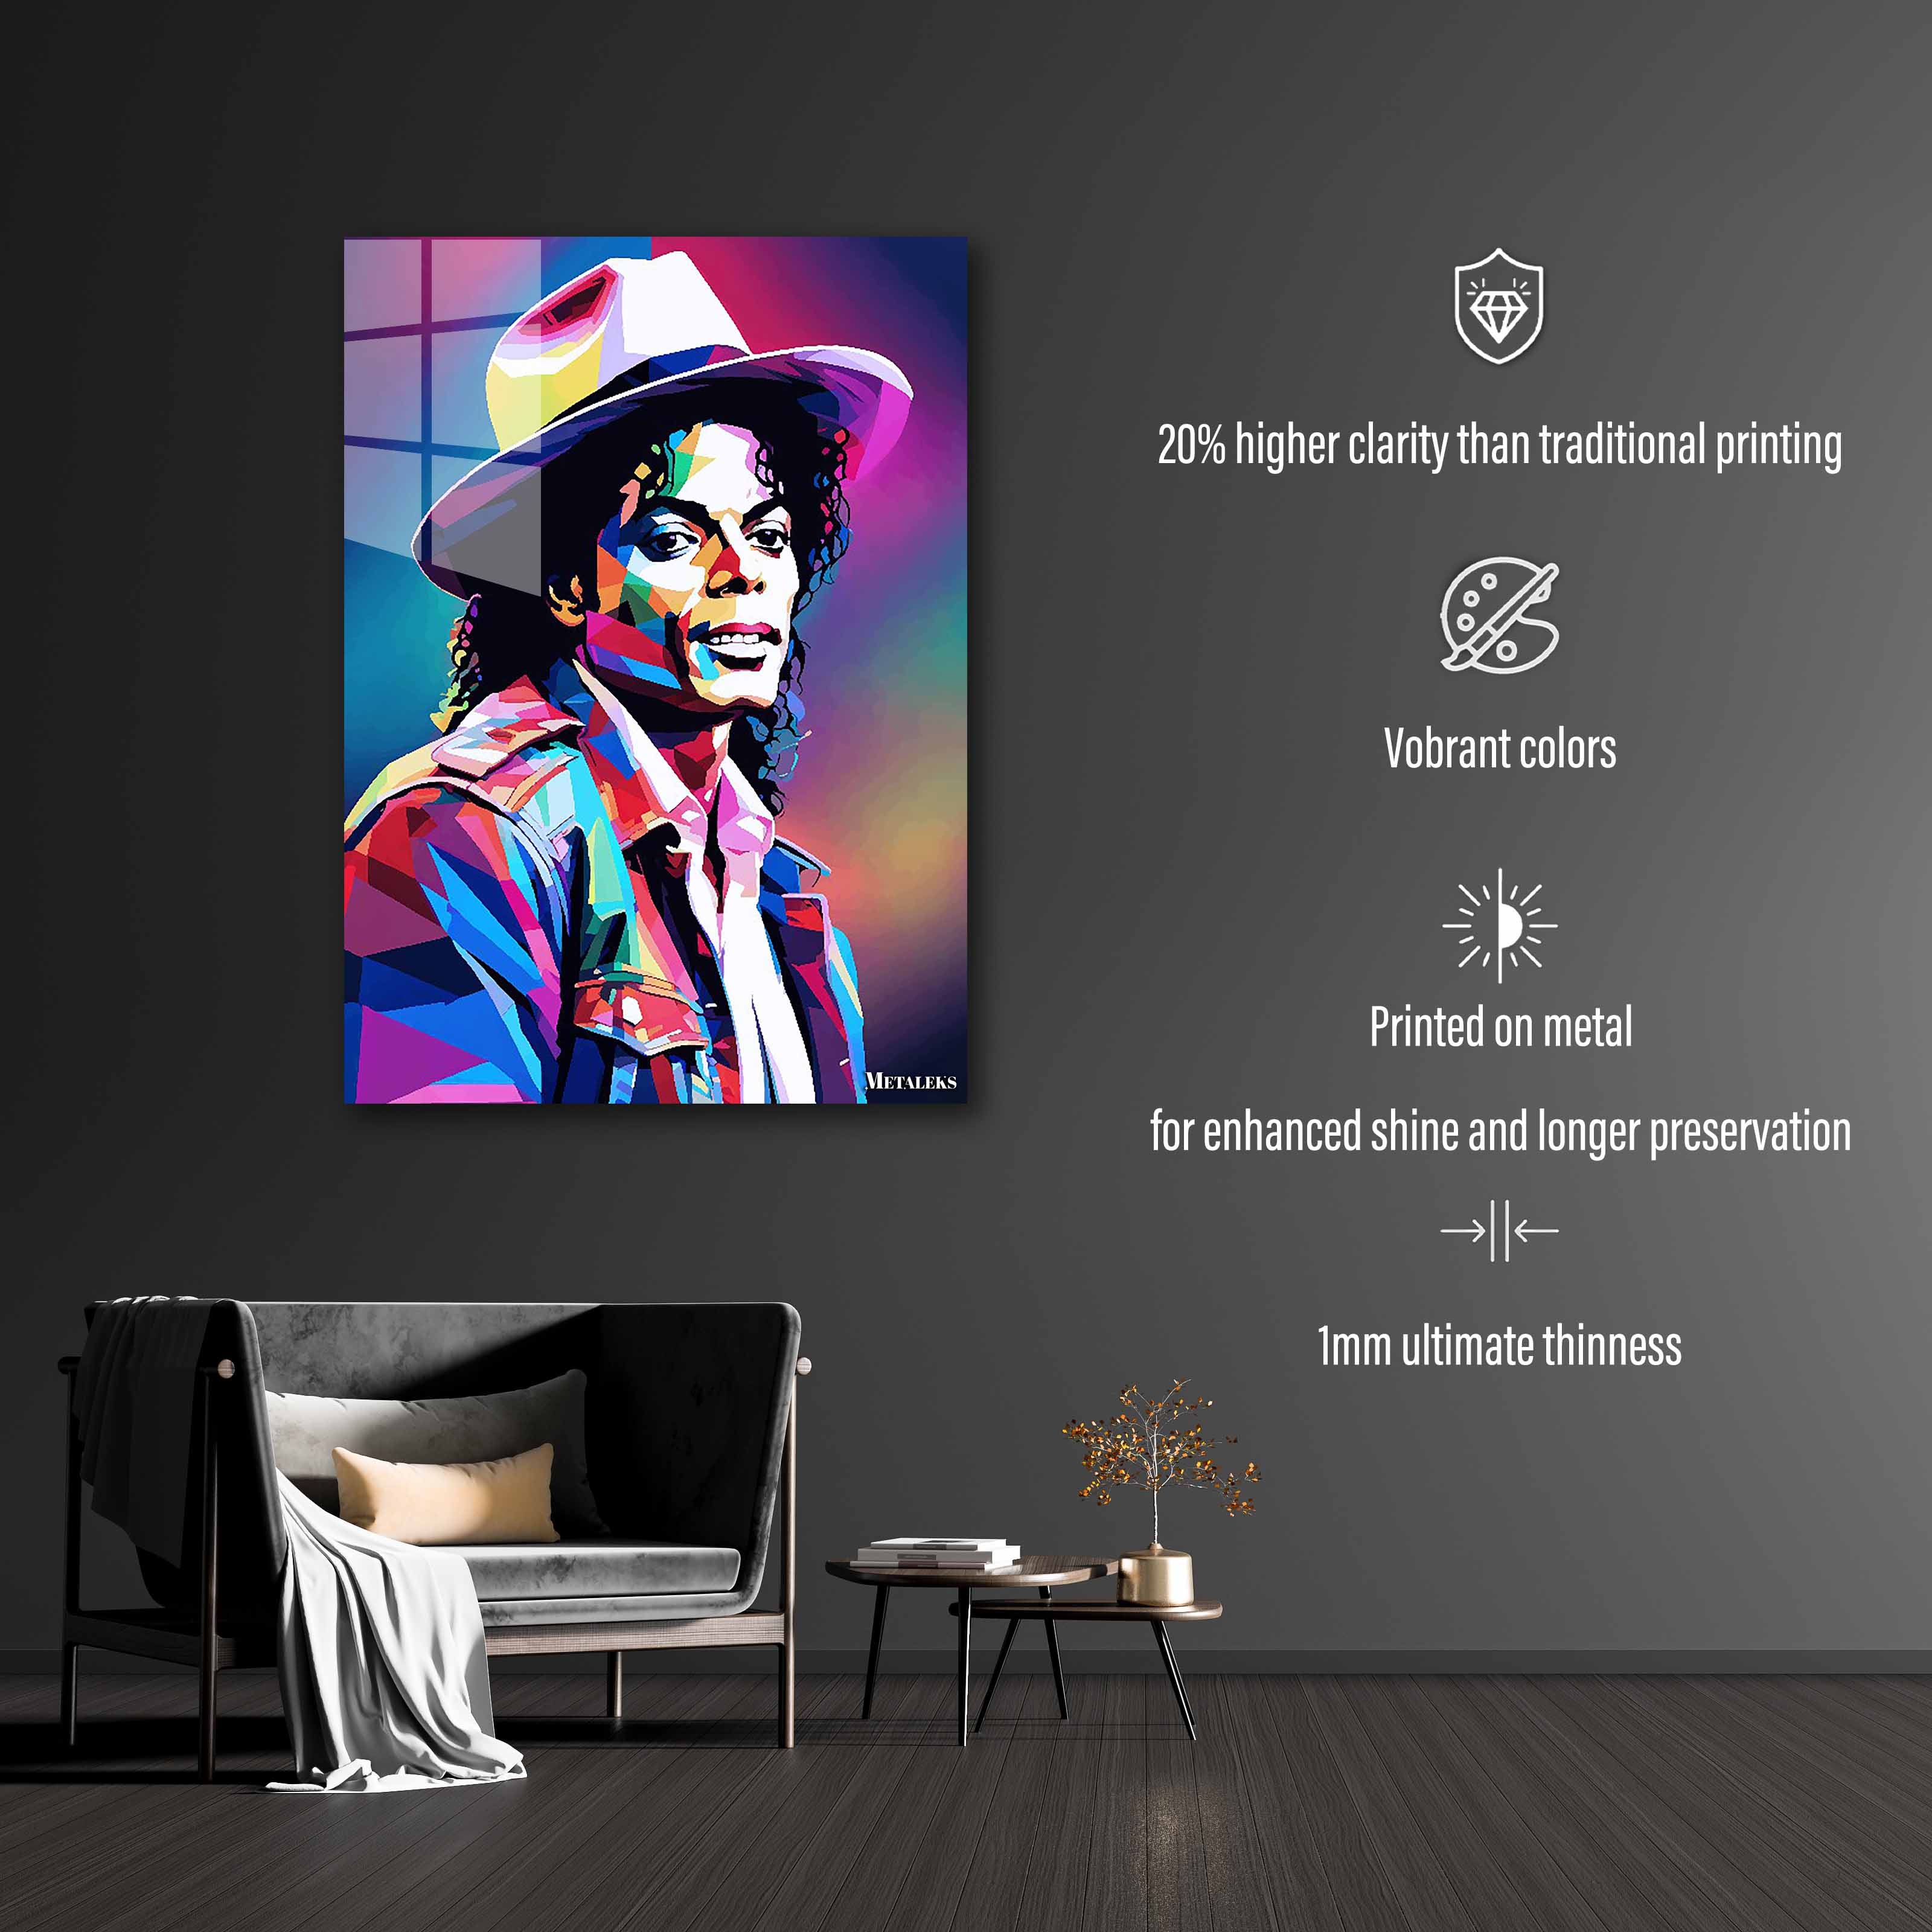 Michael Jackson 1-designed by @ALTAY